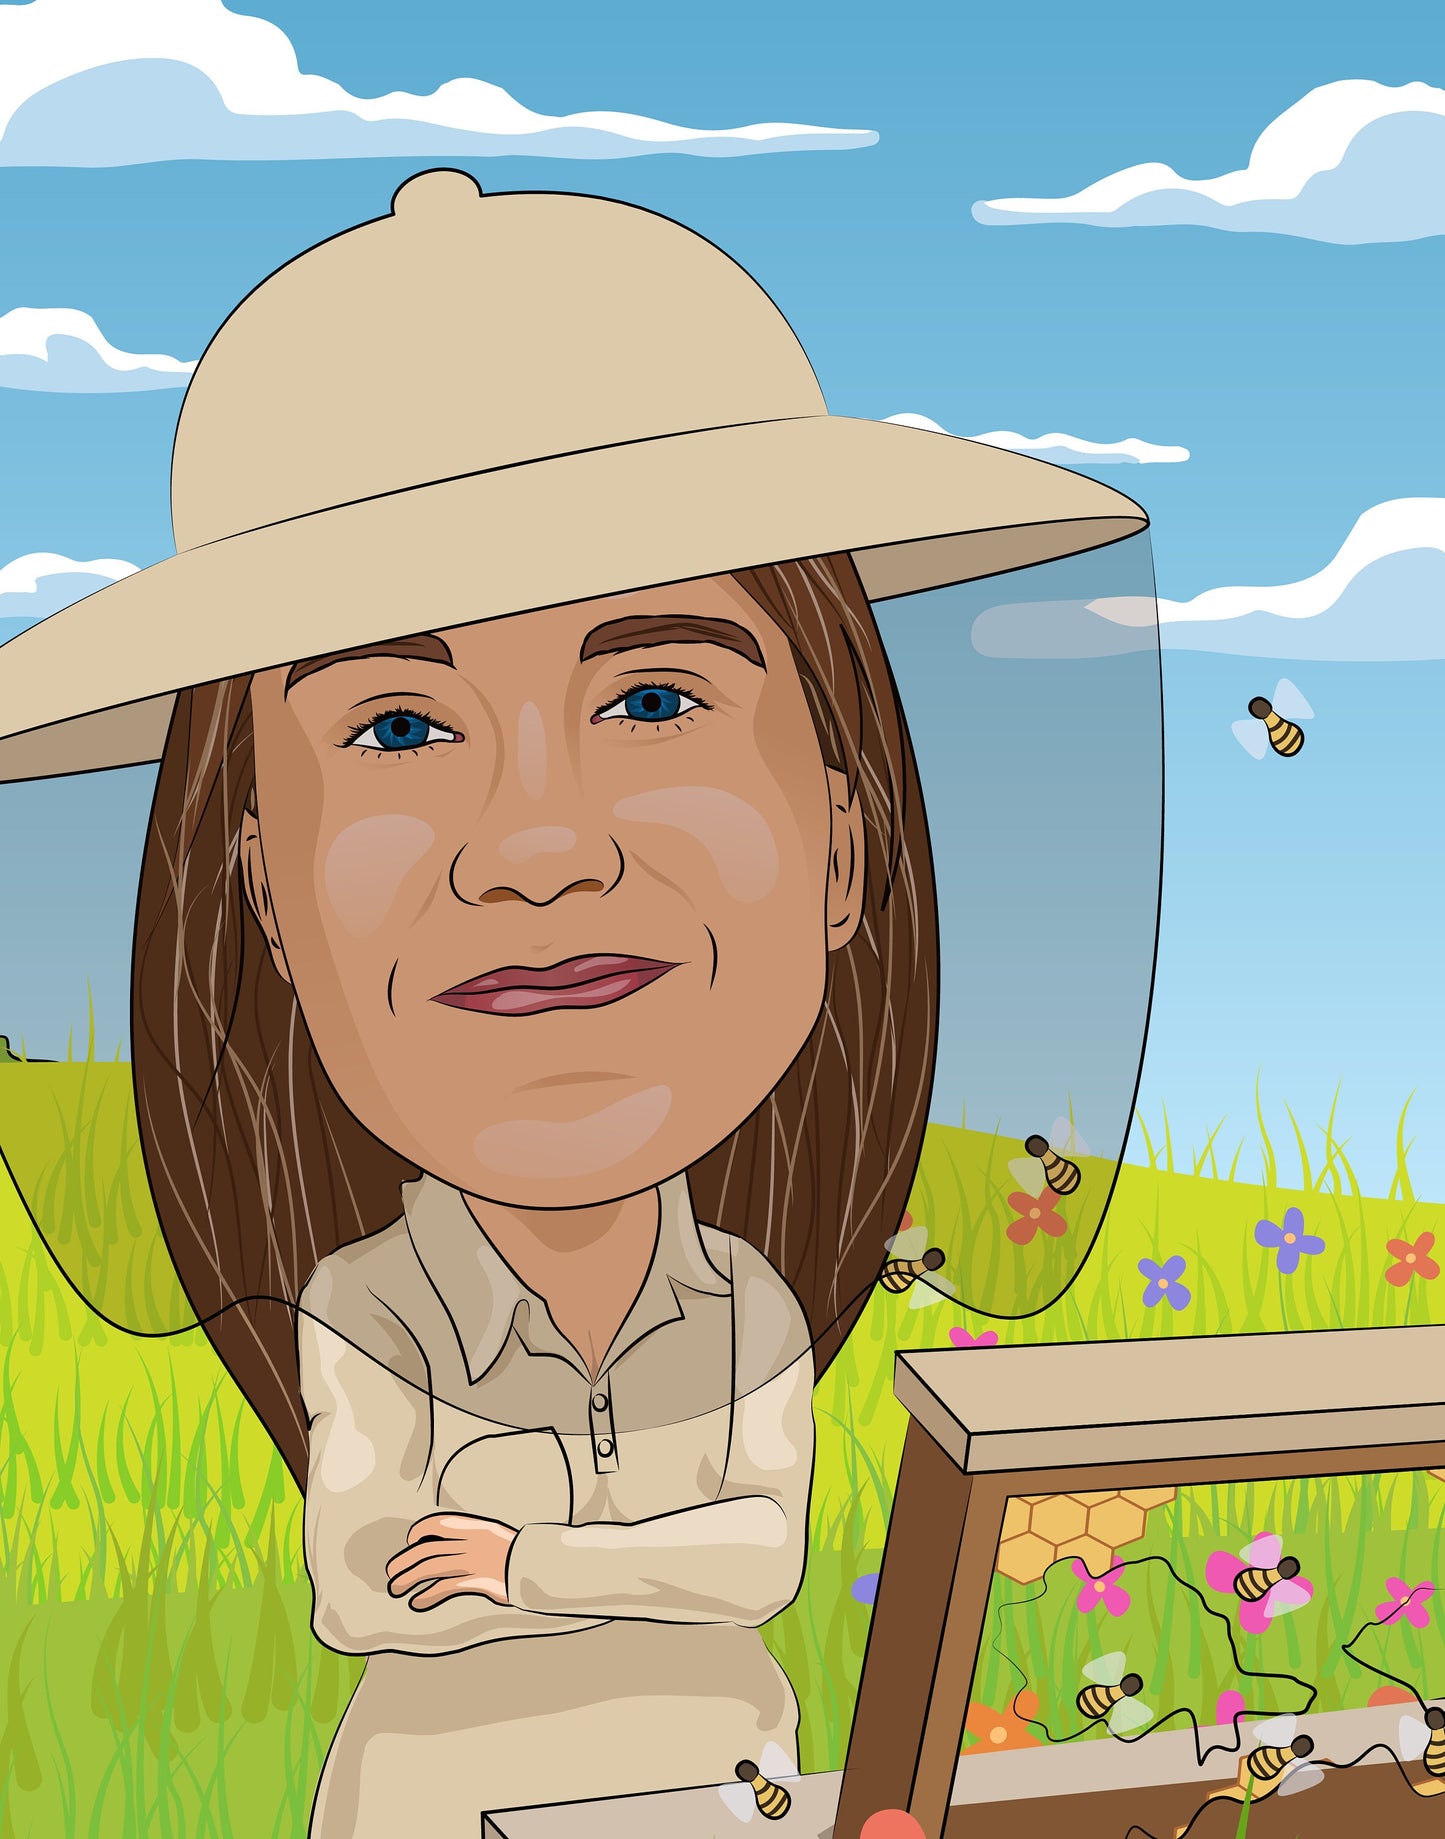 Beekeeper Gift - Custom Caricature Portrait From Your Photo/bee keeper gift/apiarist gift